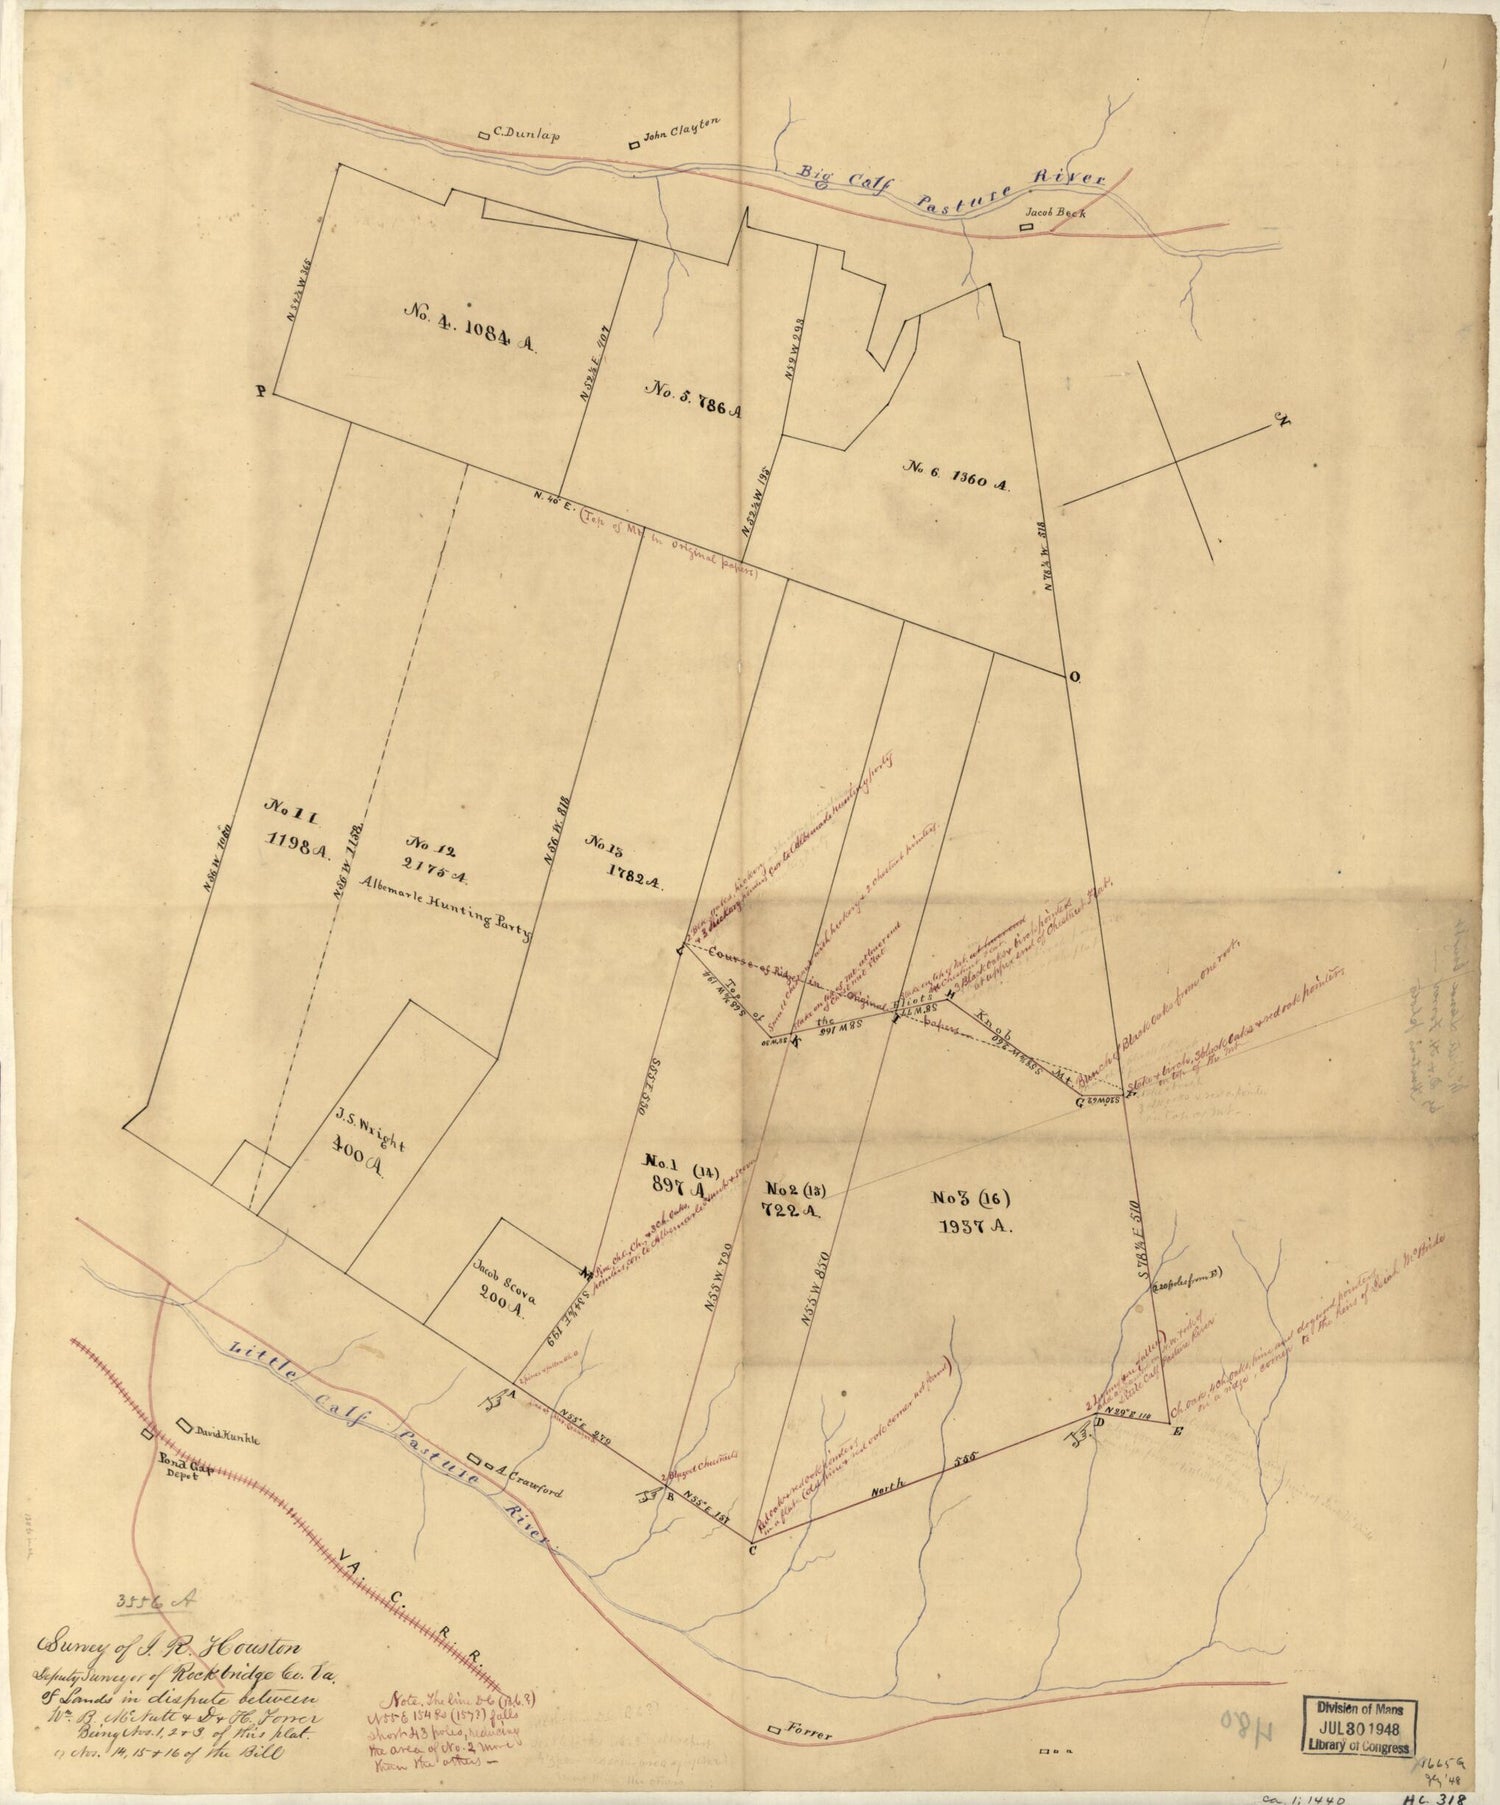 This old map of Survey of I. R. Houston, Deputy Surveyor of Rockbridge Co., Va. of Lands In Dispute Between Wm. B. McNutt &amp; D.&amp; H. Forrer, Being Nos. 1, 2 &amp; 3 of This Plat (Nos. 14, 15 &amp; 16 of the Bill) from 1870 was created by I. R. Houston in 1870